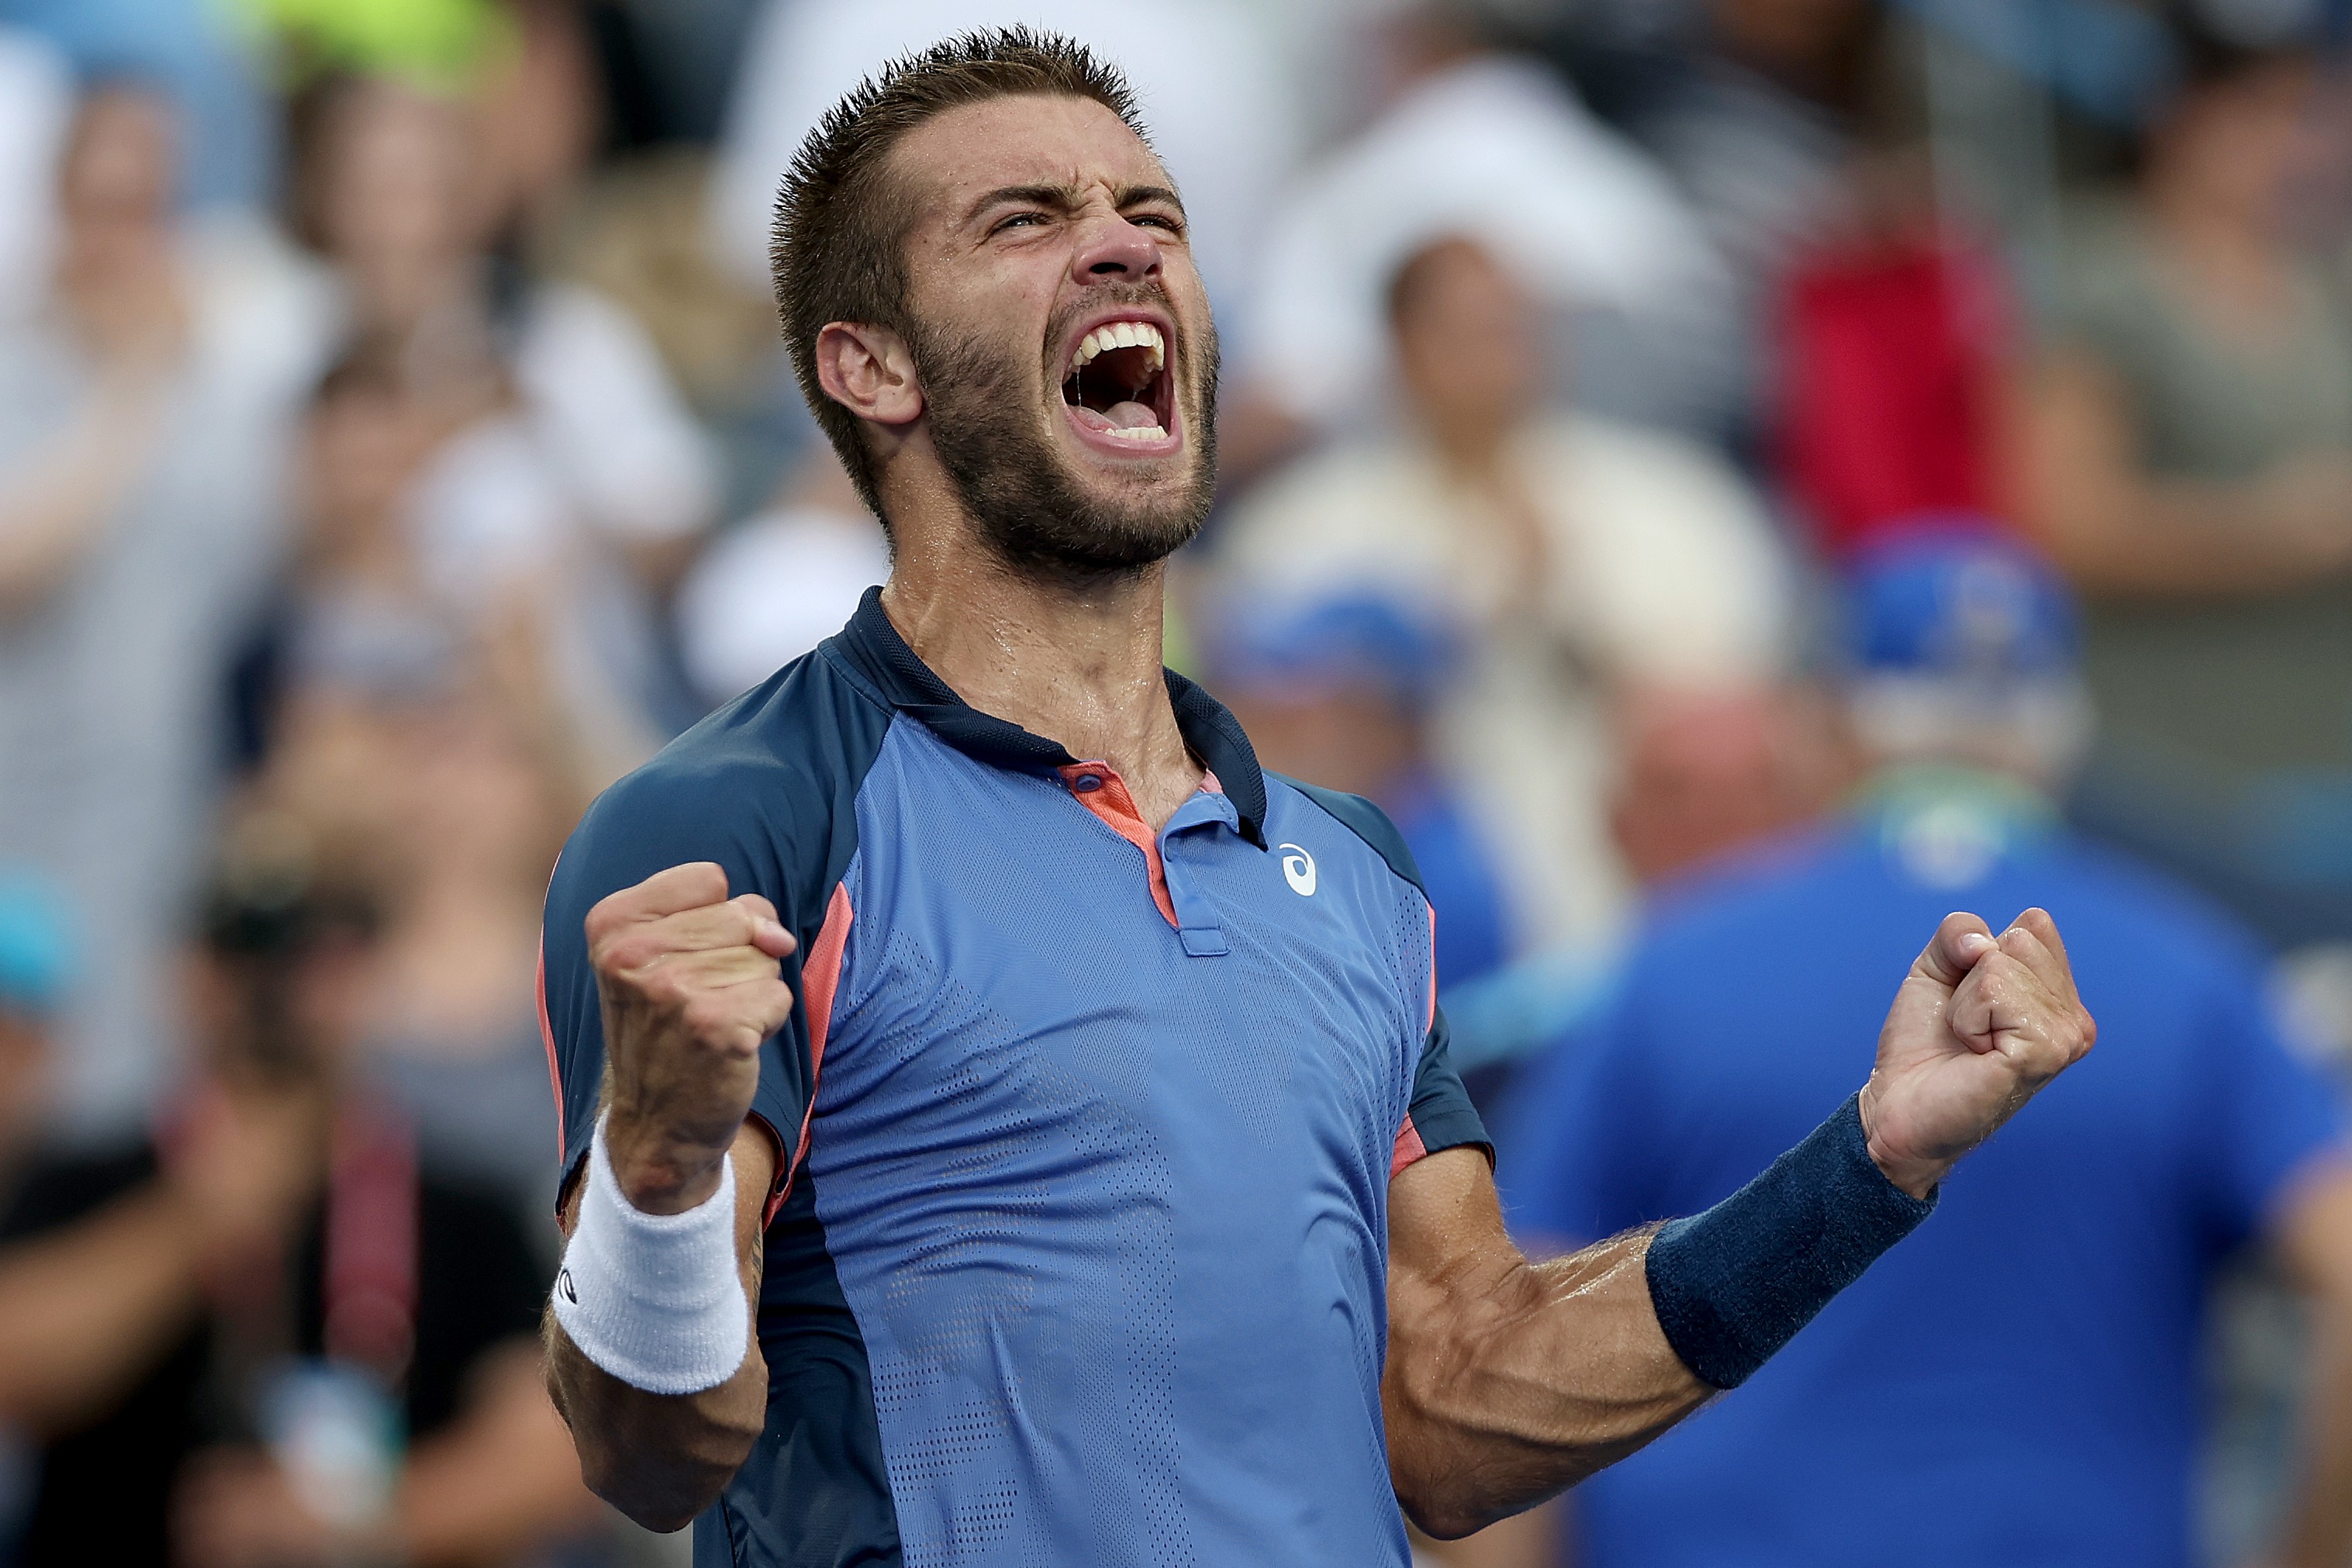 Borna Coric continued the ATP’s recent run of big-event upheaval with a